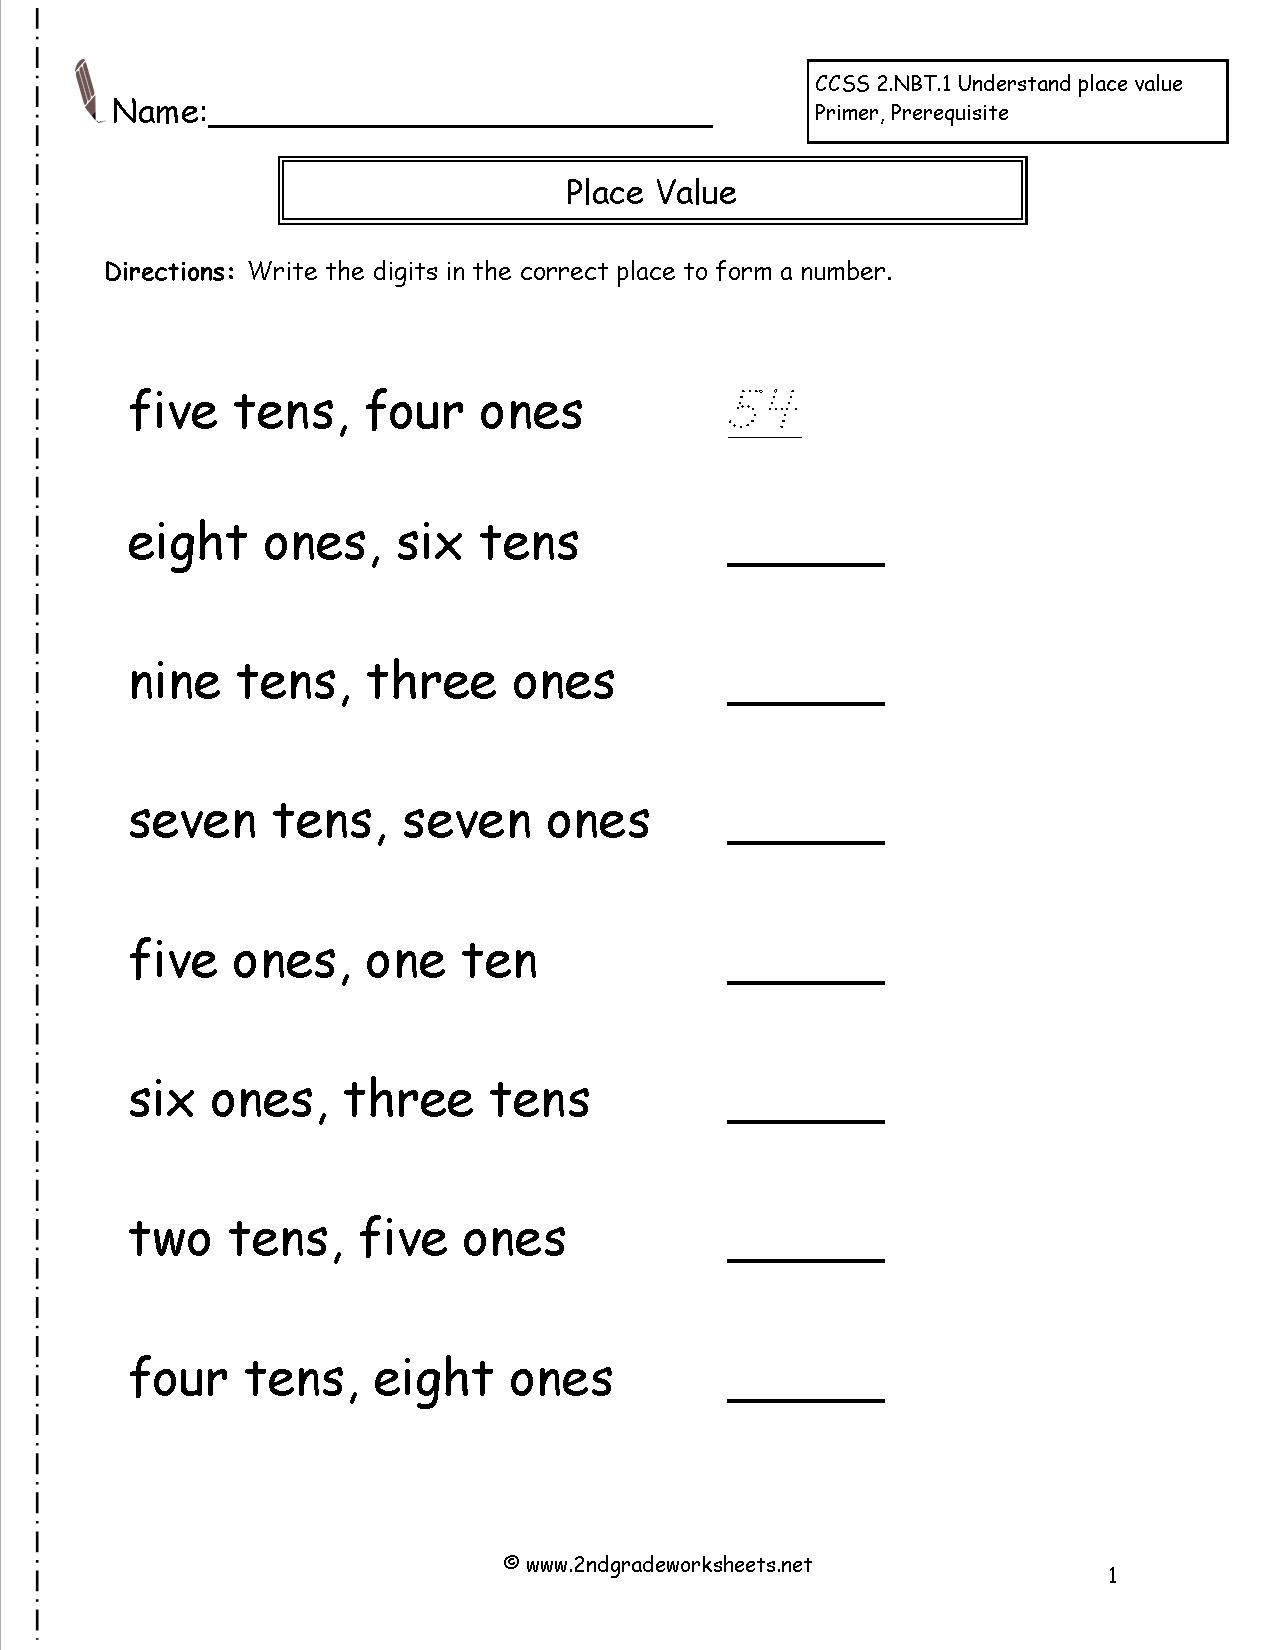 place-value-worksheets-2nd-grade-free-printable-lessons